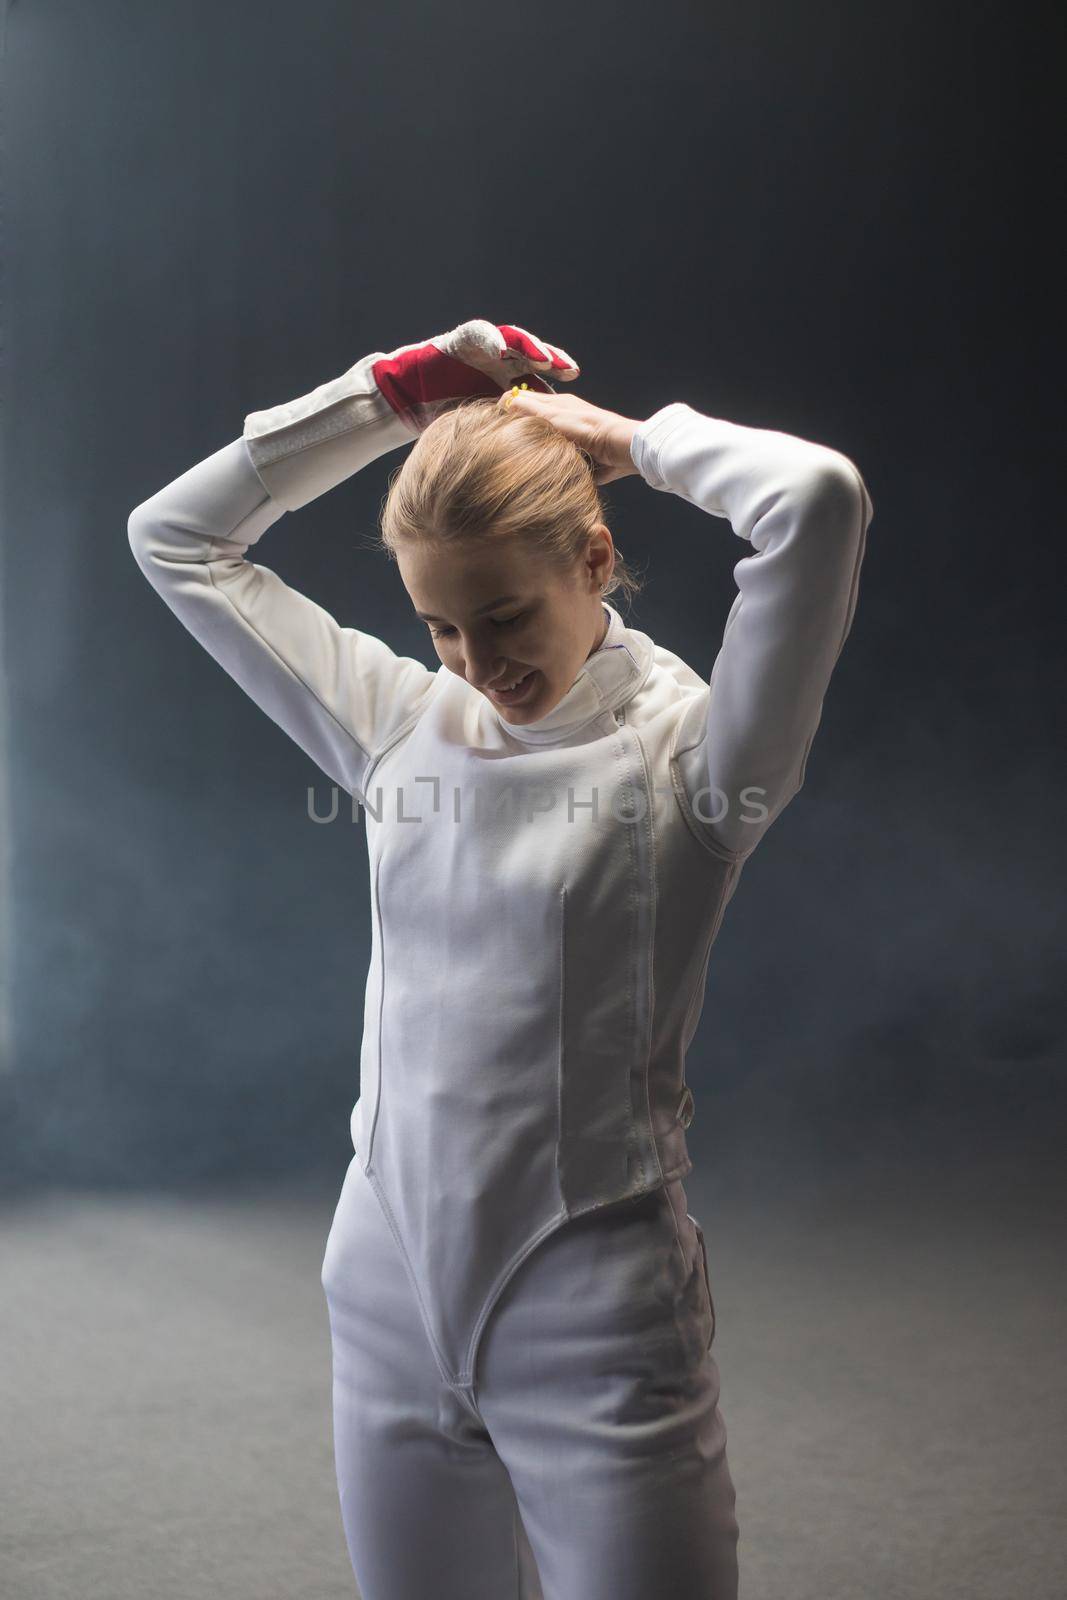 A young woman fencer putting her hair up into a bun before the training by Studia72